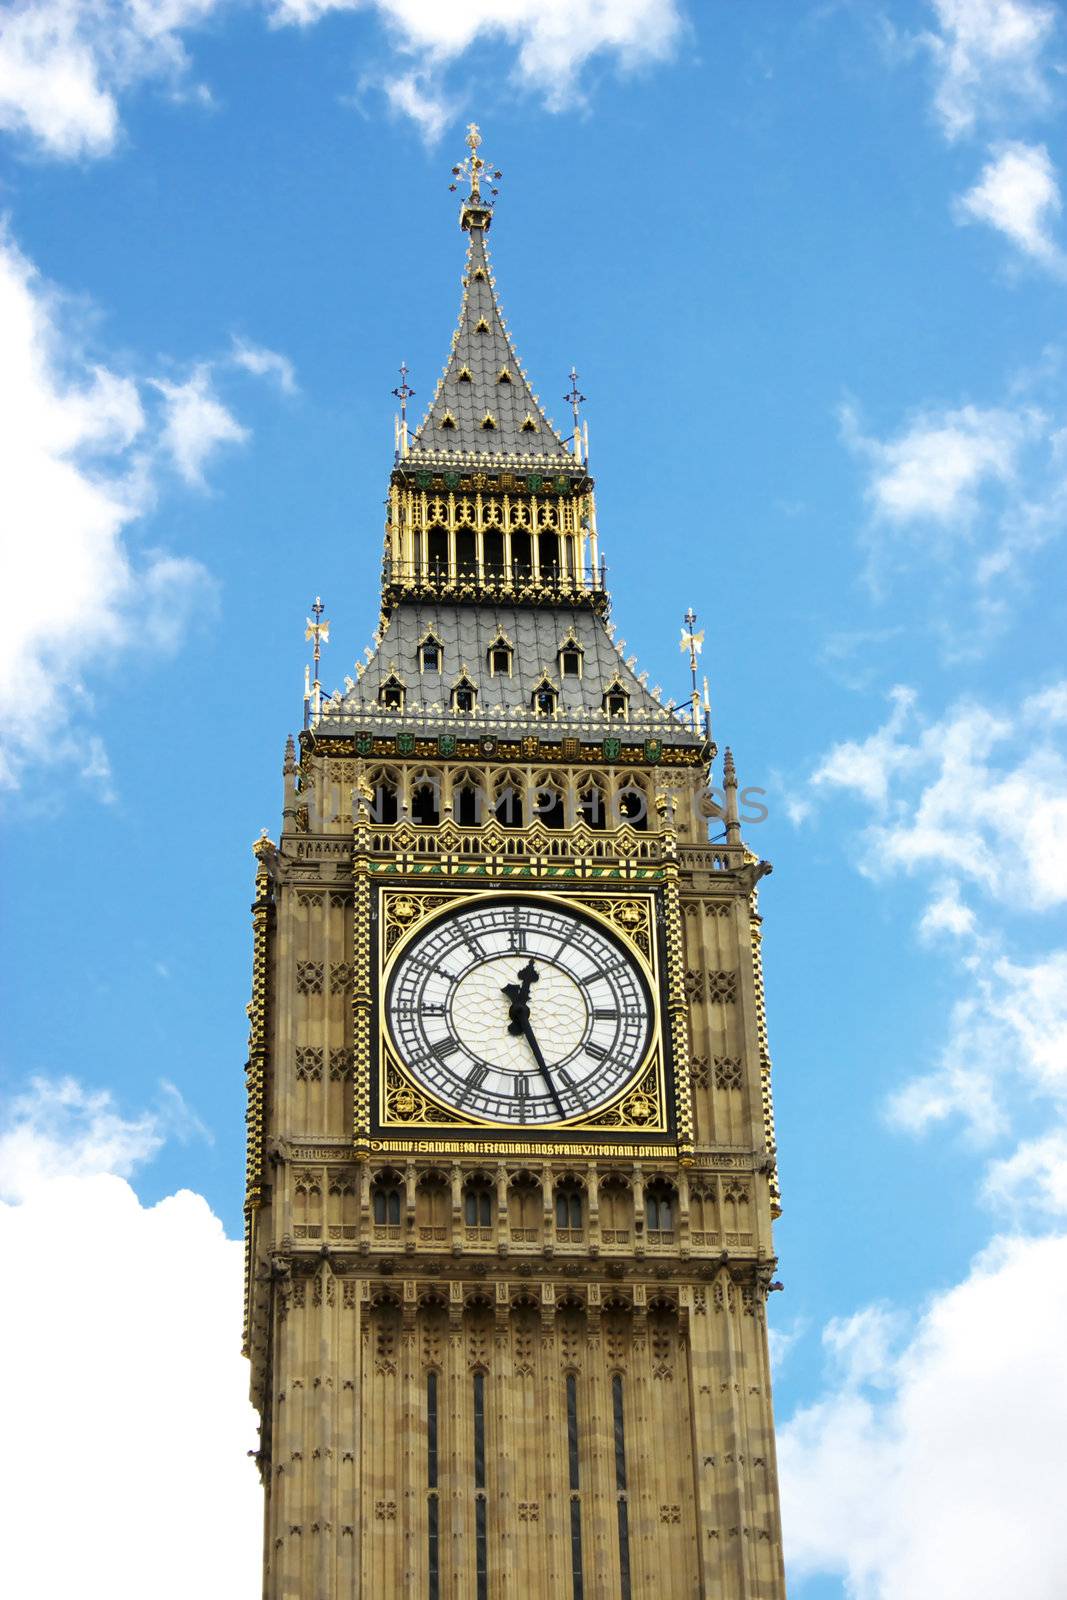 Big Ben with fluffy white clouds and blue sky